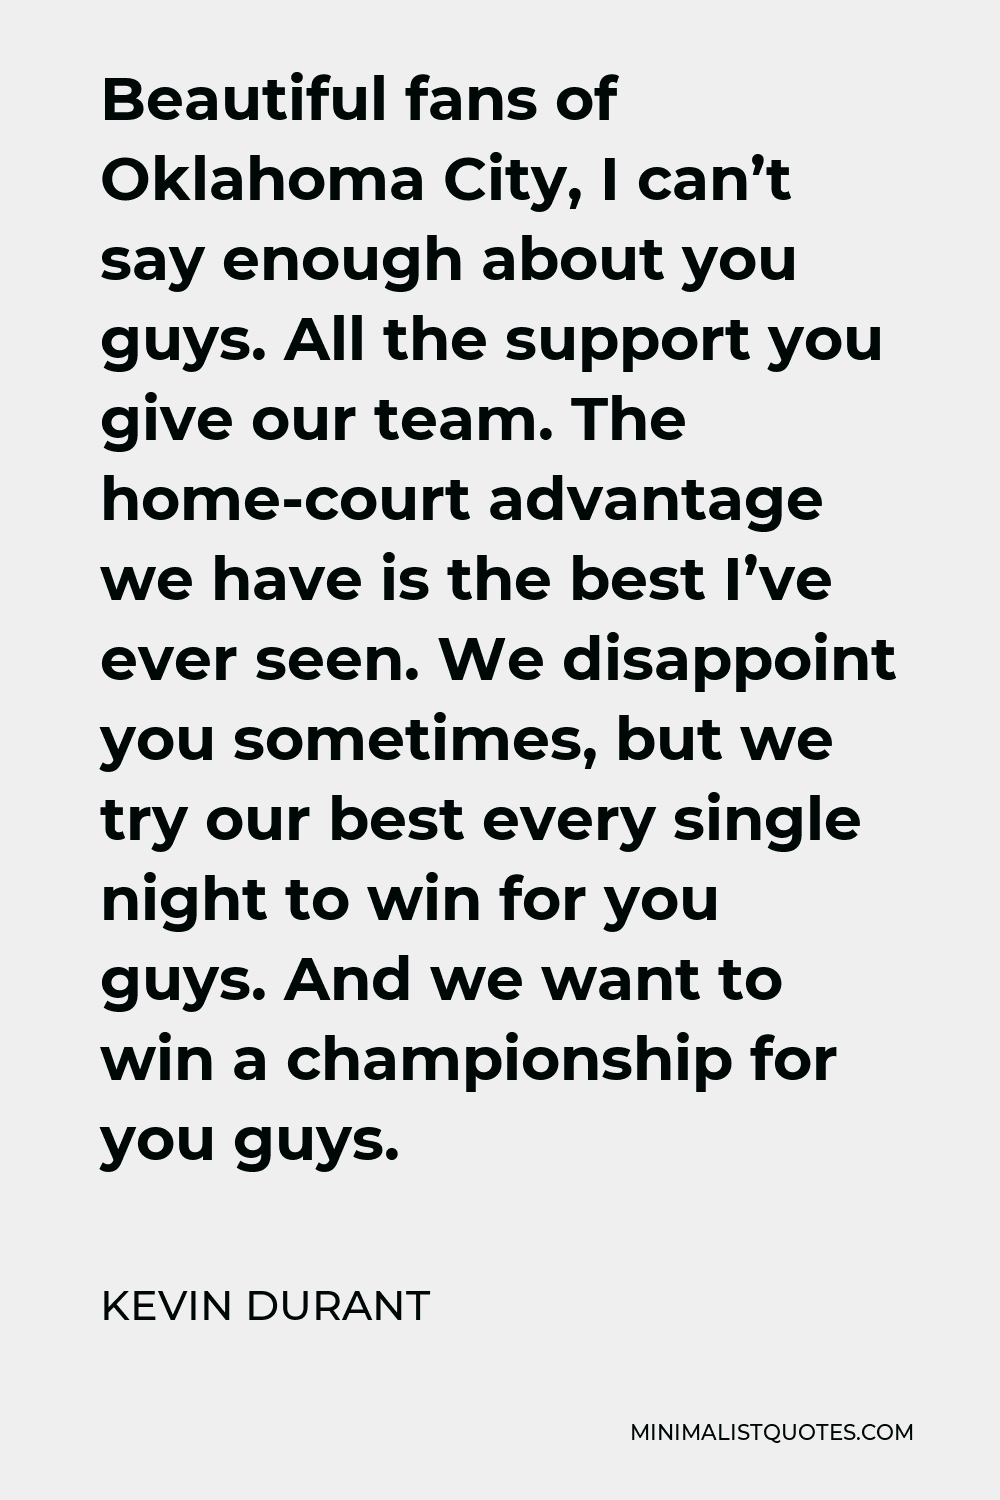 Kevin Durant Quote - Beautiful fans of Oklahoma City, I can’t say enough about you guys. All the support you give our team. The home-court advantage we have is the best I’ve ever seen. We disappoint you sometimes, but we try our best every single night to win for you guys. And we want to win a championship for you guys.